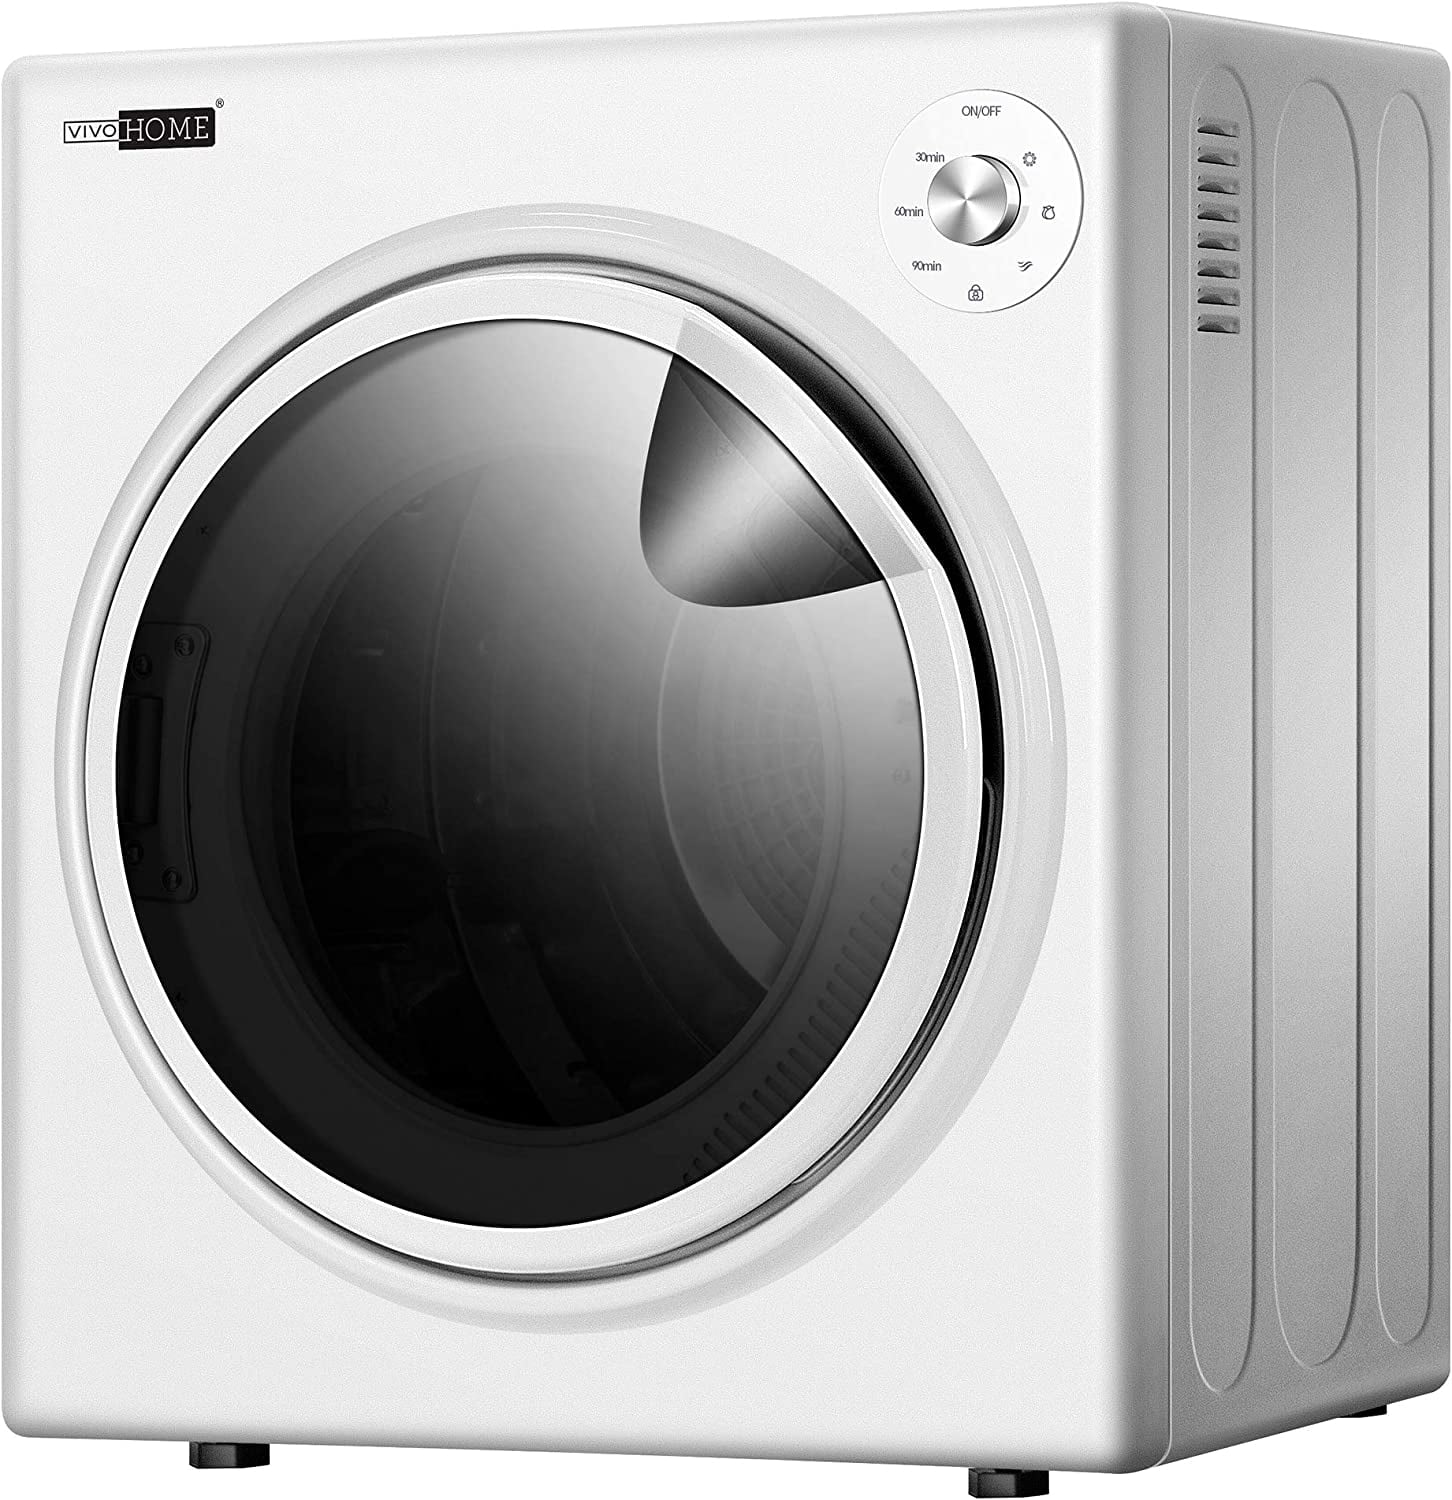 Panda Portable Compact Stainless Steel Tumble Dryer Apartment Size 110V 13lbs/3.75 Cu.Ft. PAN760SF